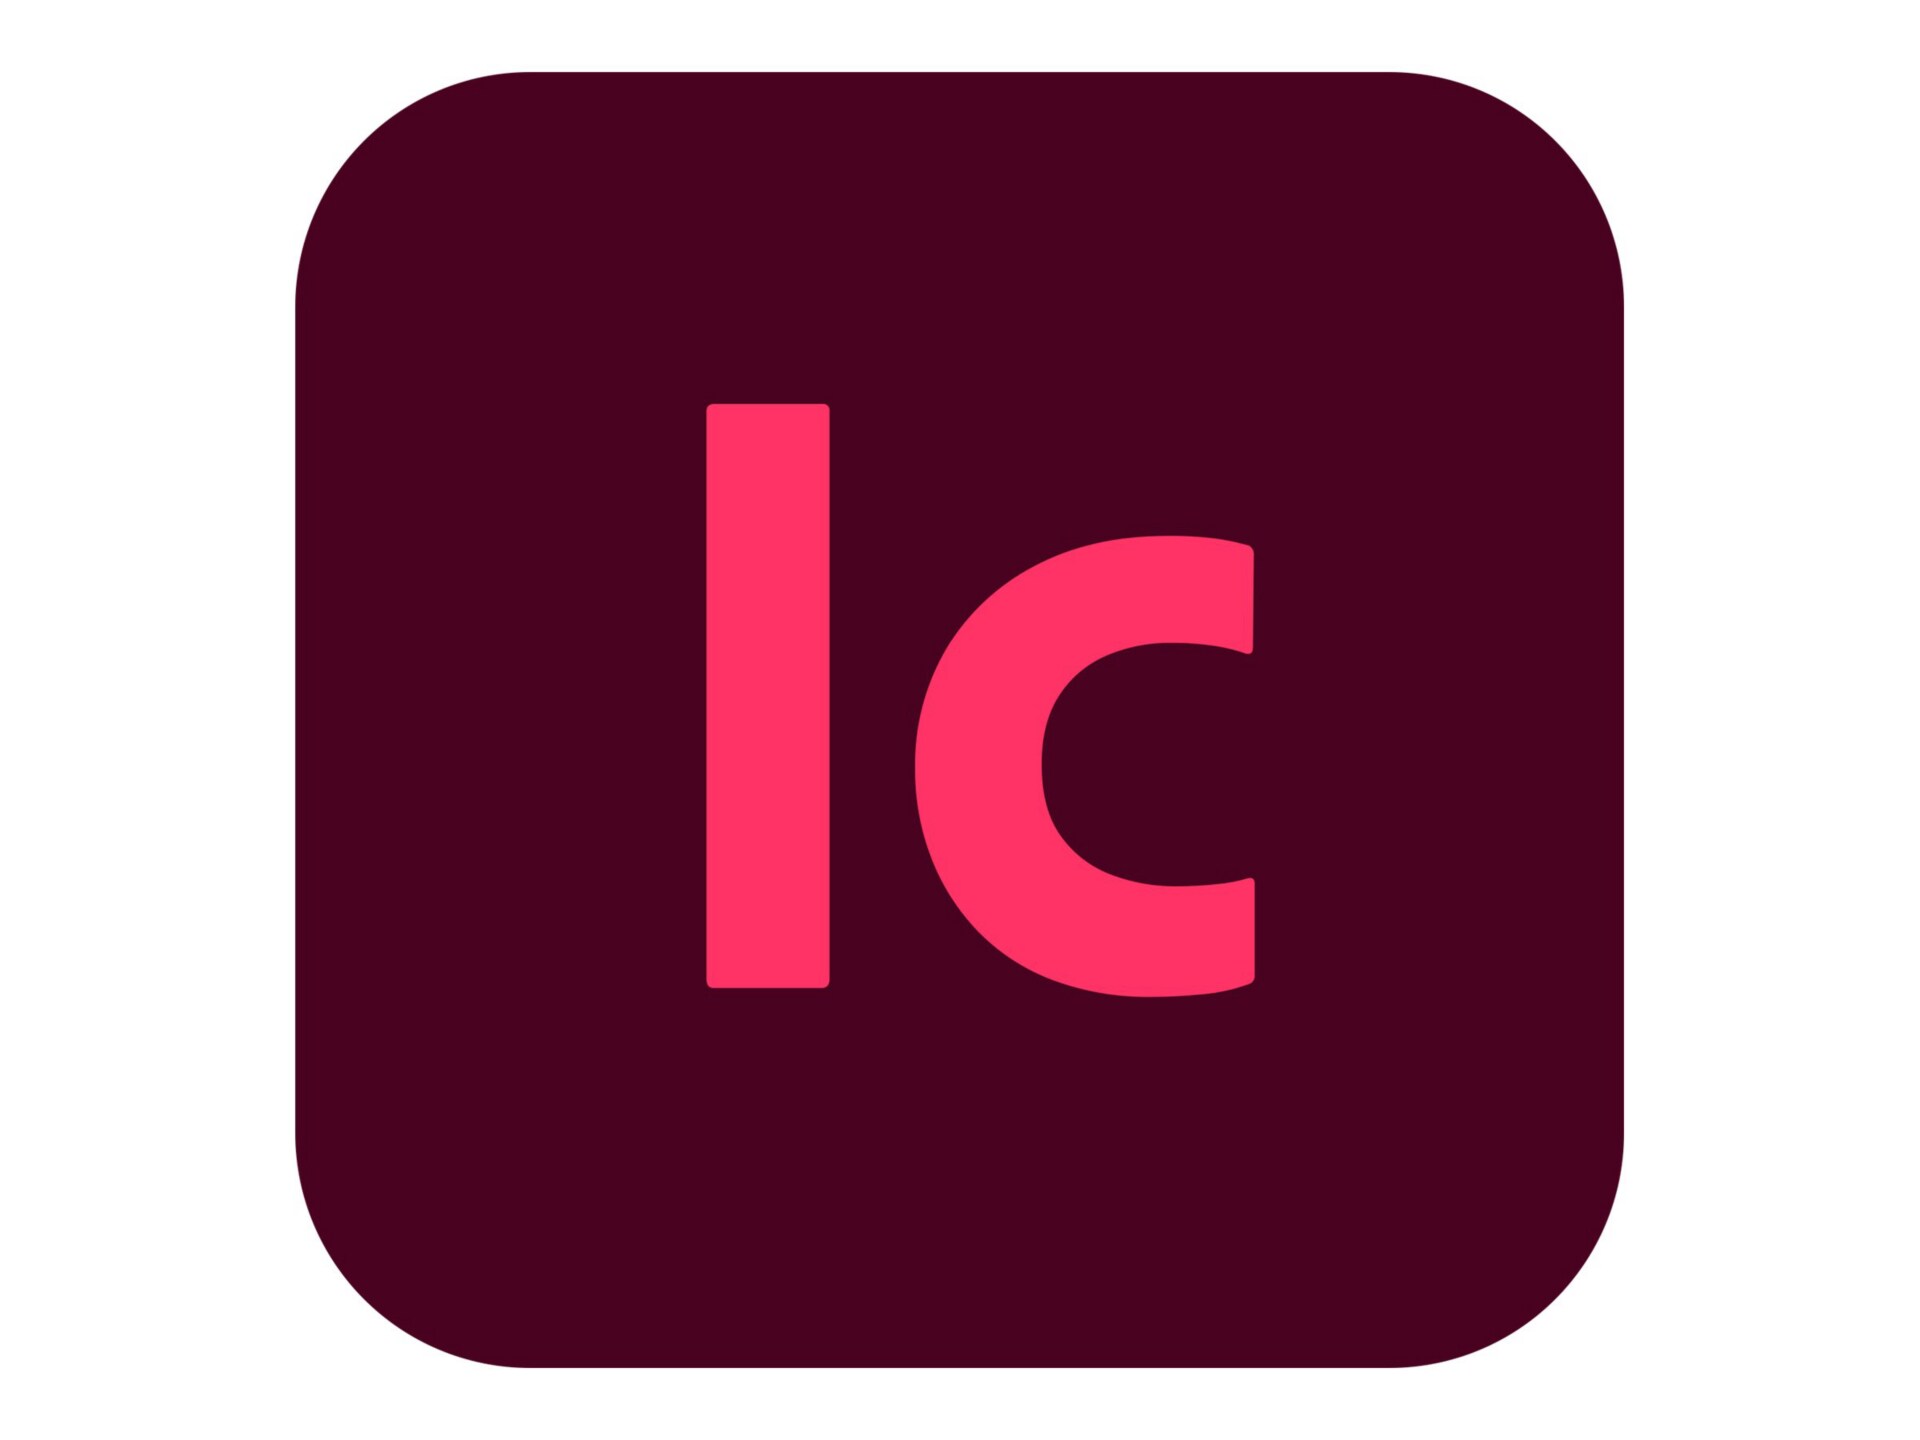 Adobe InCopy CC - Subscription New (16 months) - 1 user